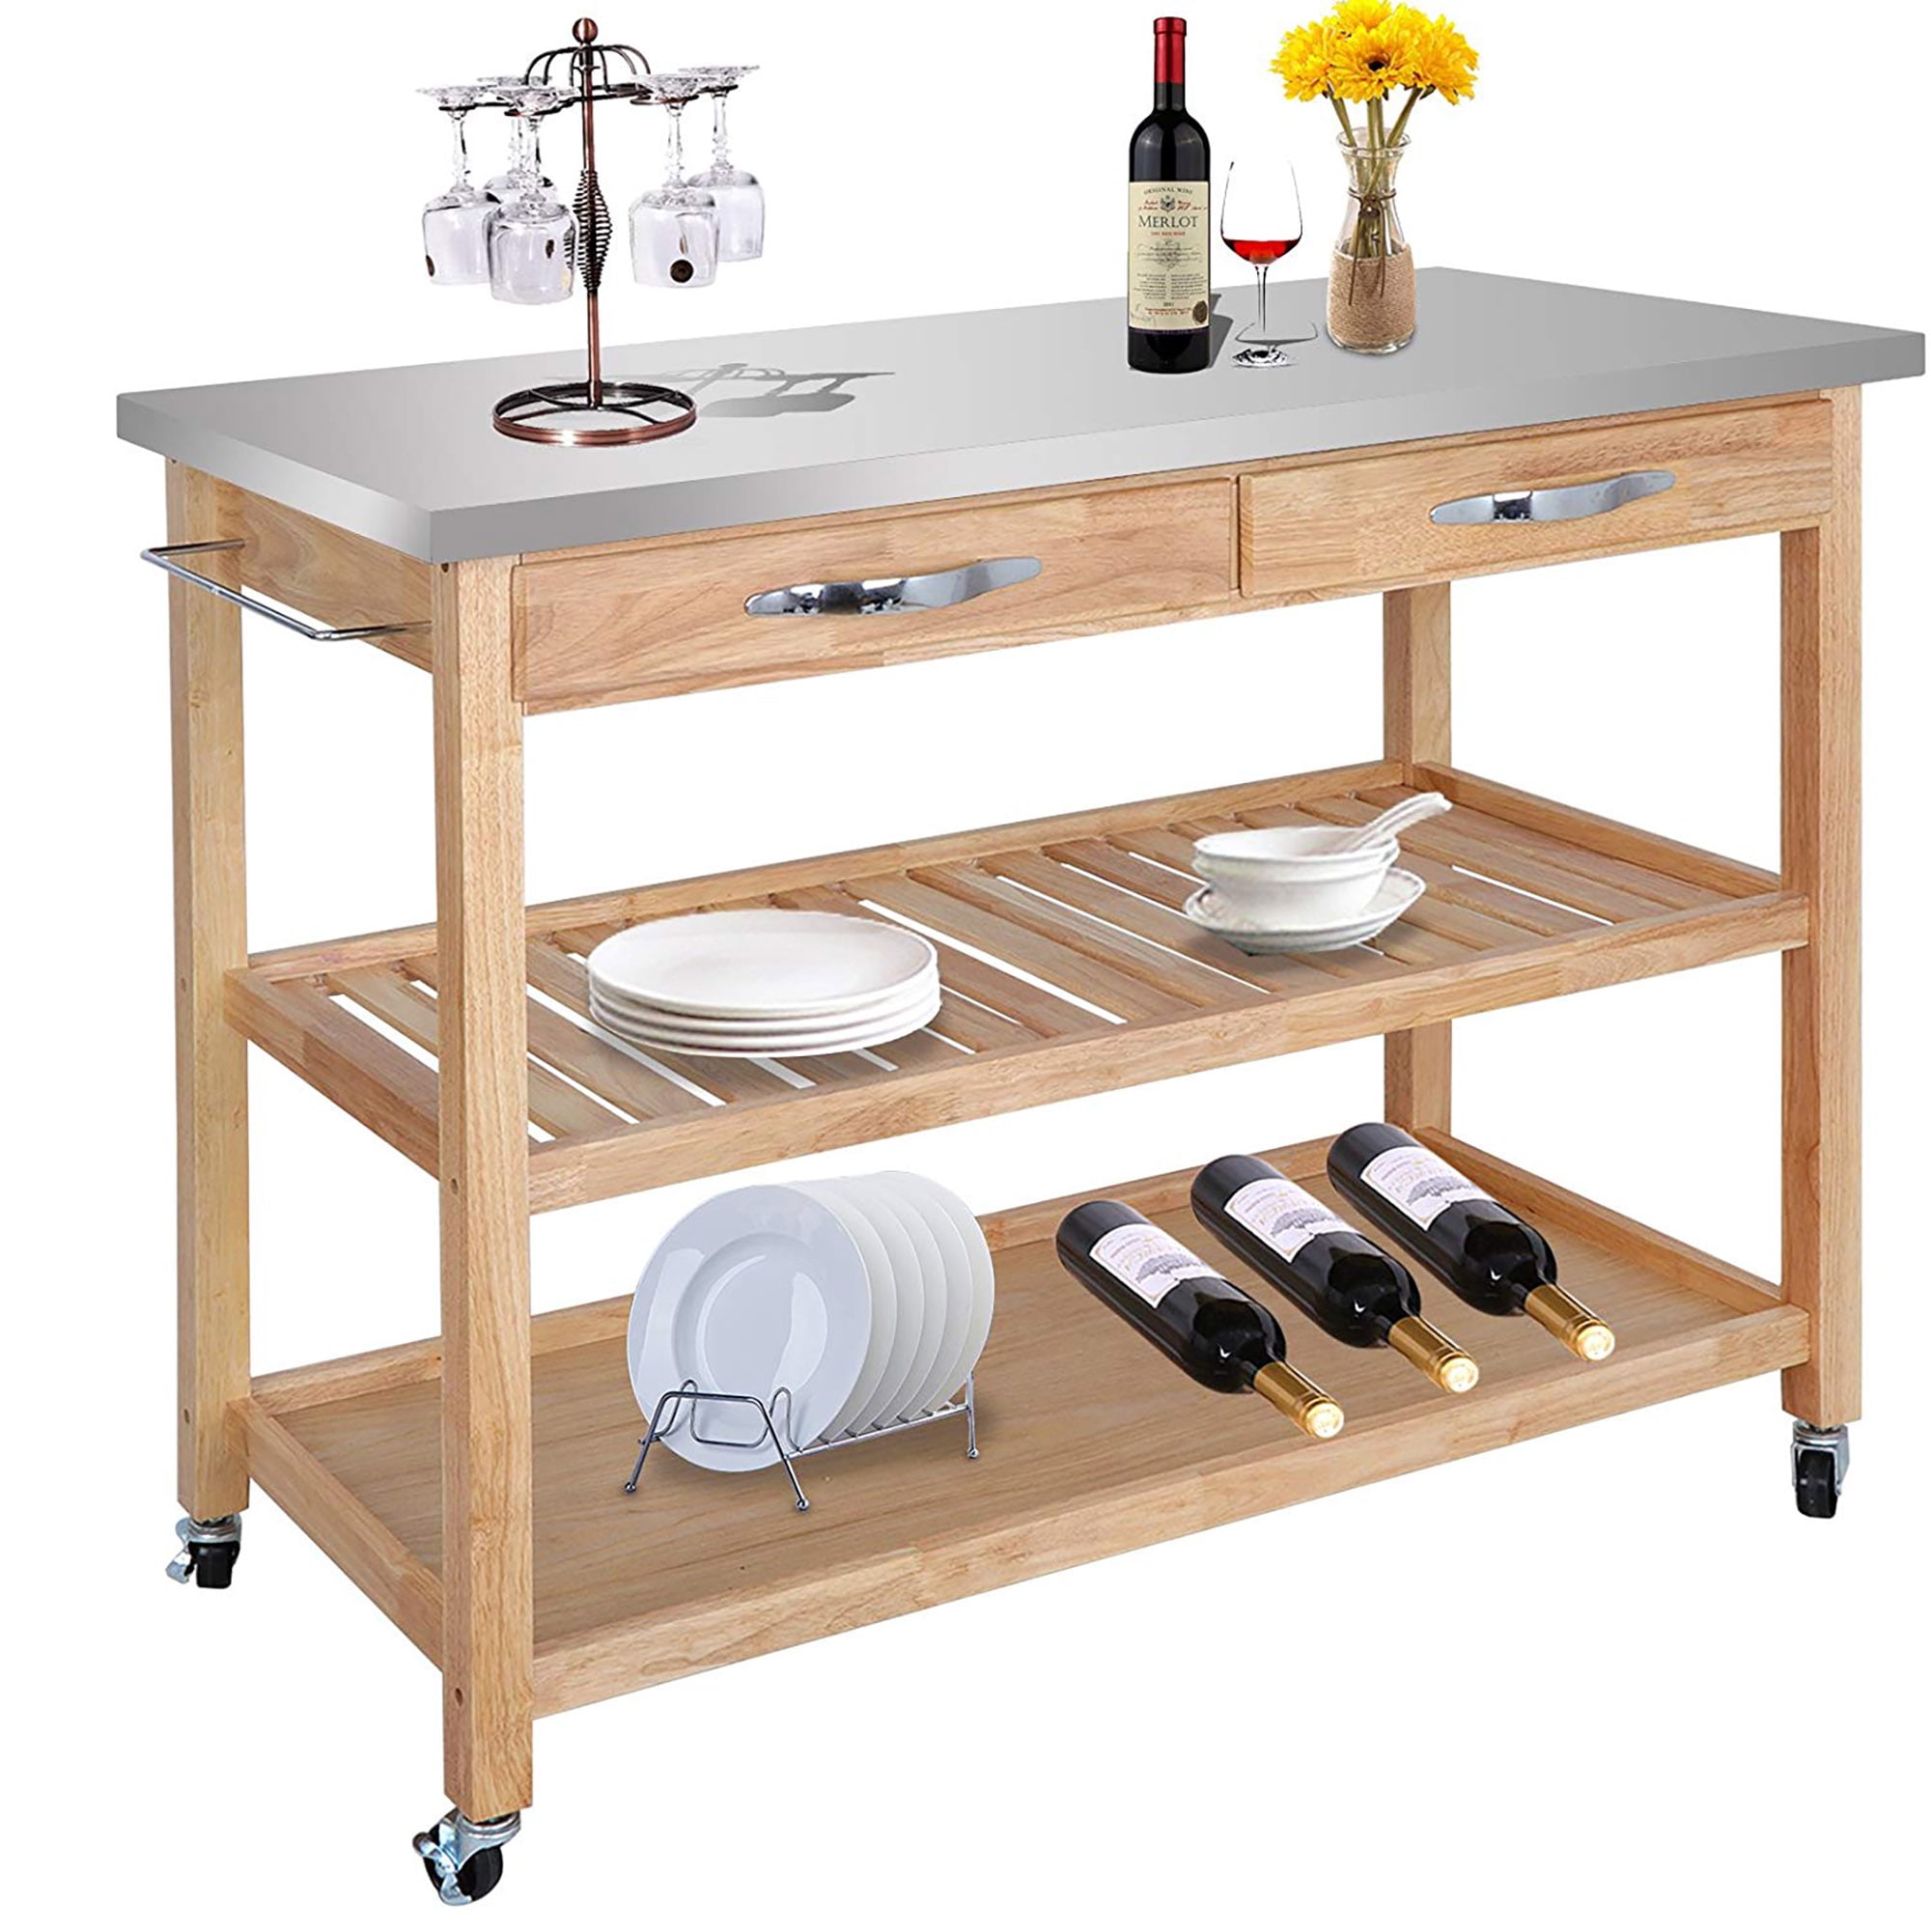 Utility Microwave Oven Stand Storage Rolling Workstation Universal Lockable Casters for Home SDHYL Kitchen Island Serving Cart with Utility Wood Tabletop Restaurant 3-Tier Rolling Storage Cart with 3 Basket Drawers Hotel Office Dining Room 